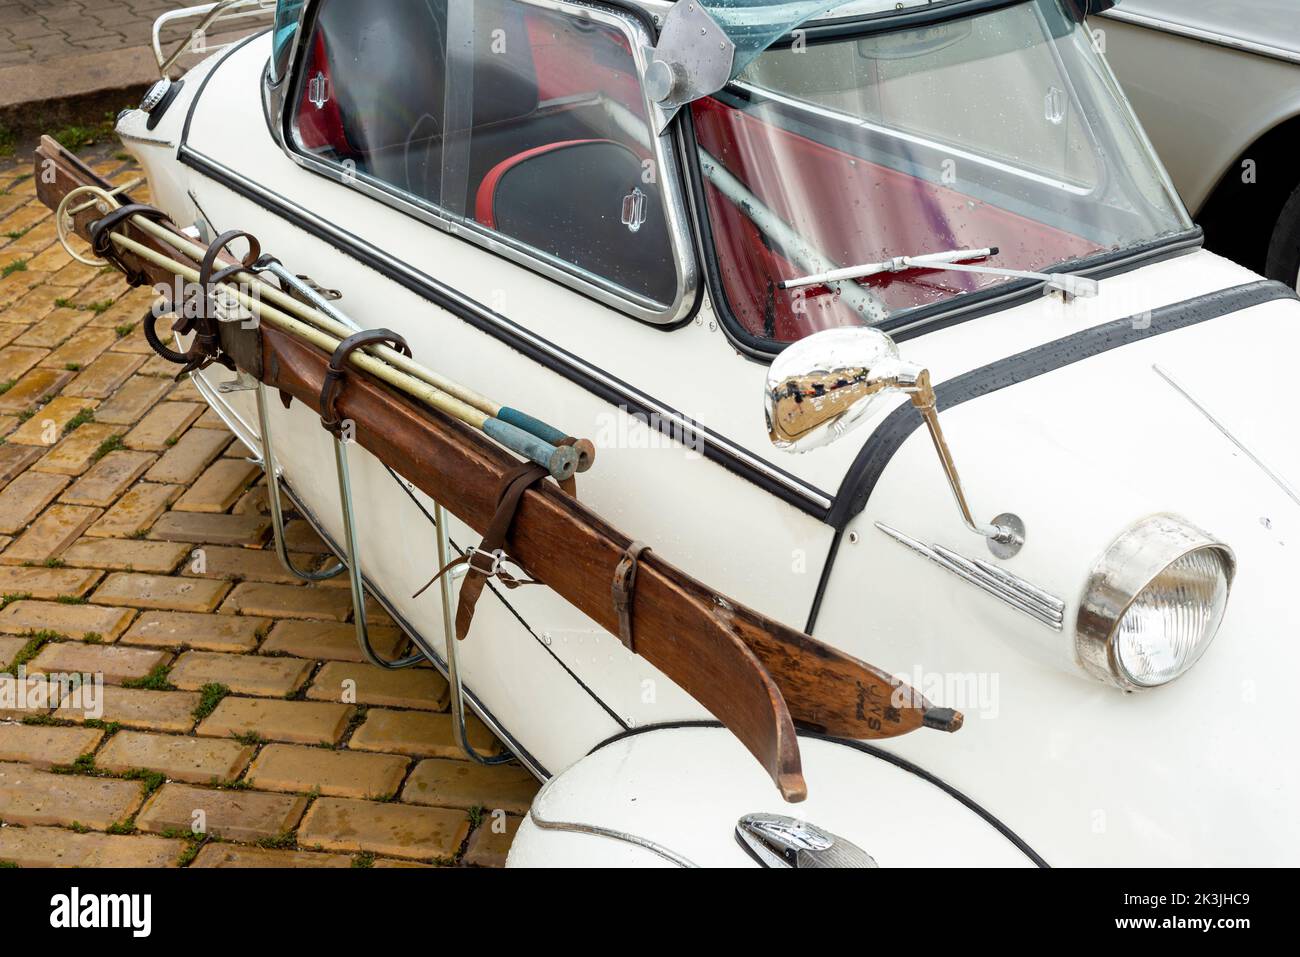 Messerschmitt KR-200 vintage car from 1955 with attached ski equipment on the side Stock Photo